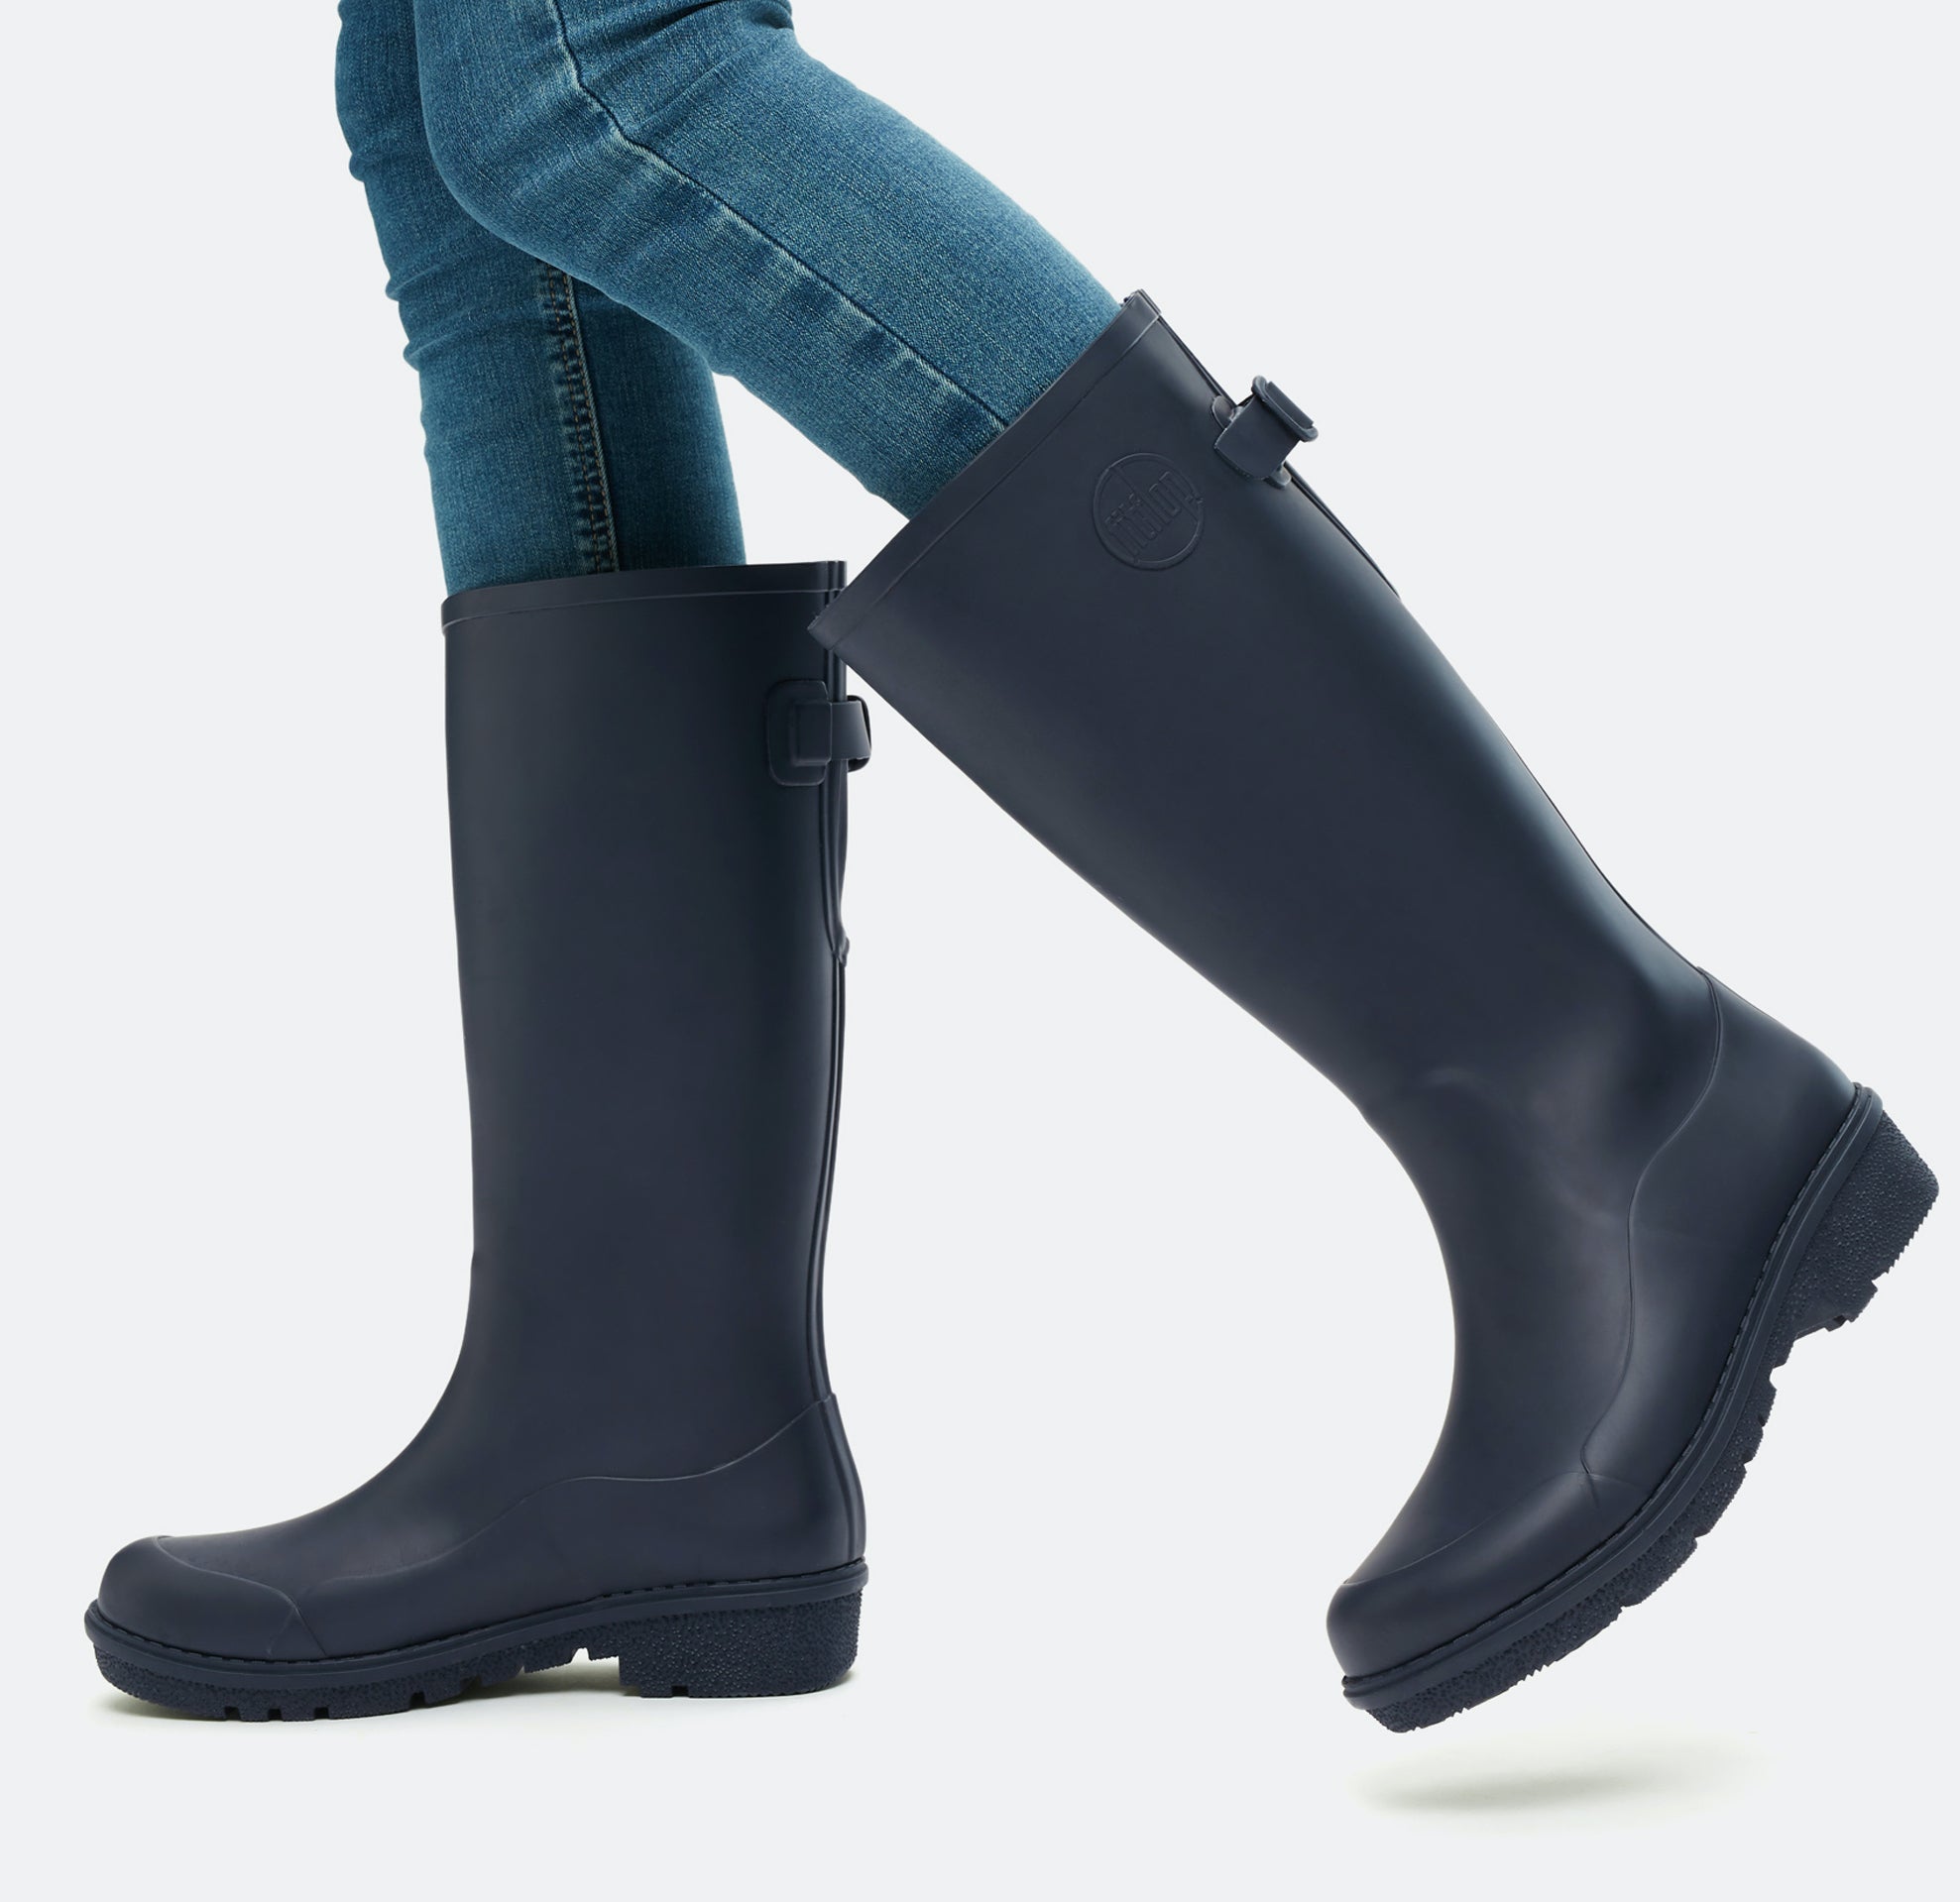 FitFlop FitFlop WONDERWELLY Tall Wellington Boots    